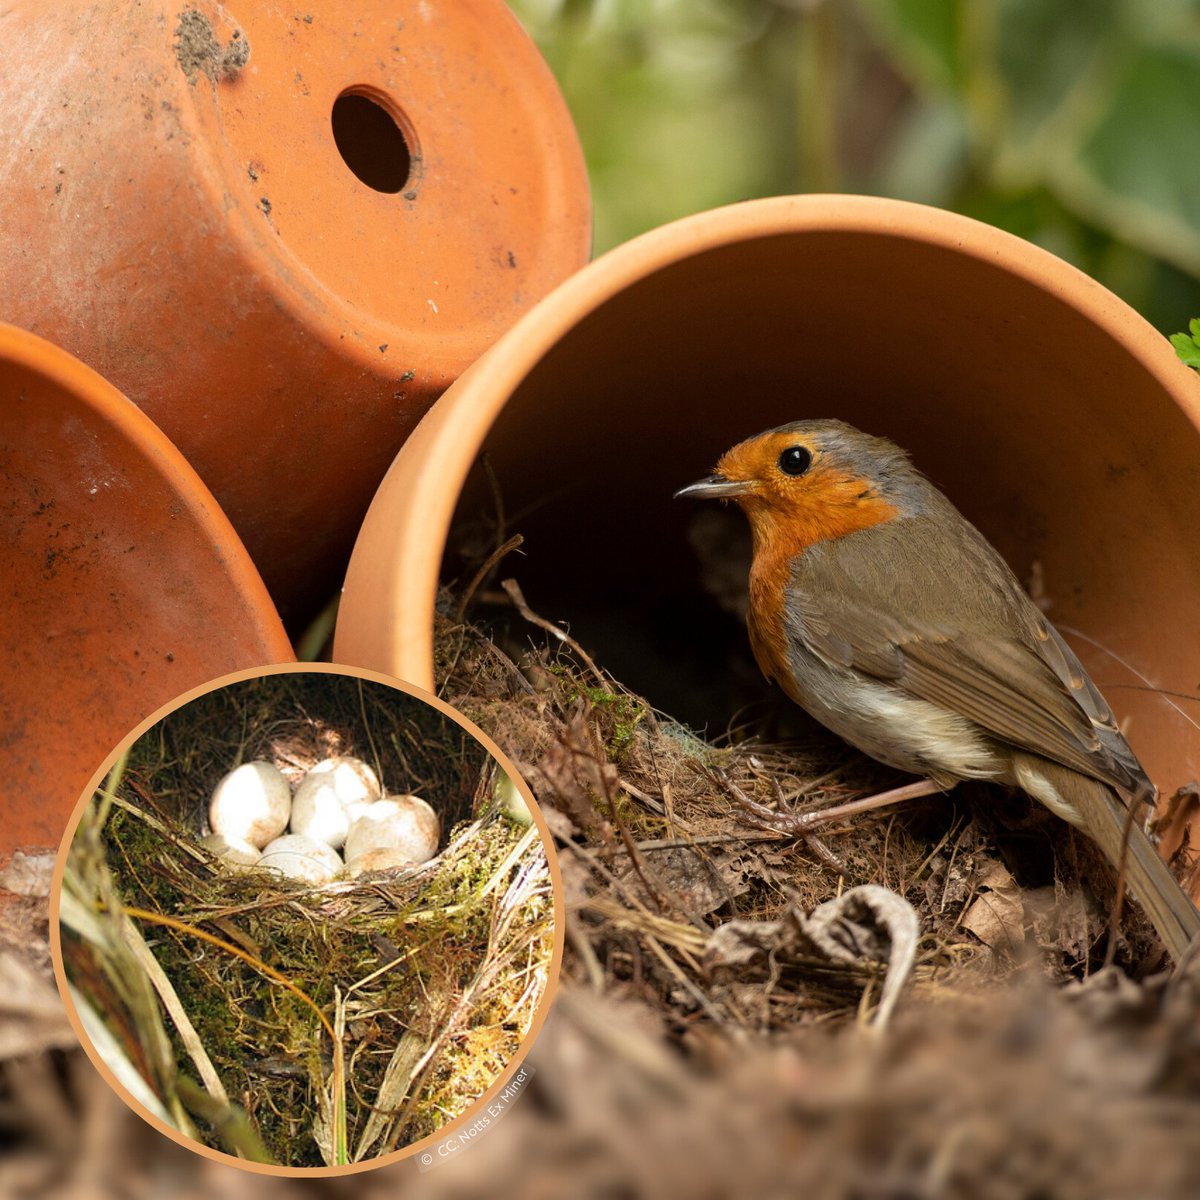 Today's #NestKnowledge: The adaptable Robin! Beloved garden companions, Robins are known to nest in unconventional spots like flowerpots or even old boots. Thick & cosy, their nests are built from leaves & moss Egg ID: 3-4 pale white or blue tinged, flecked with red brown.